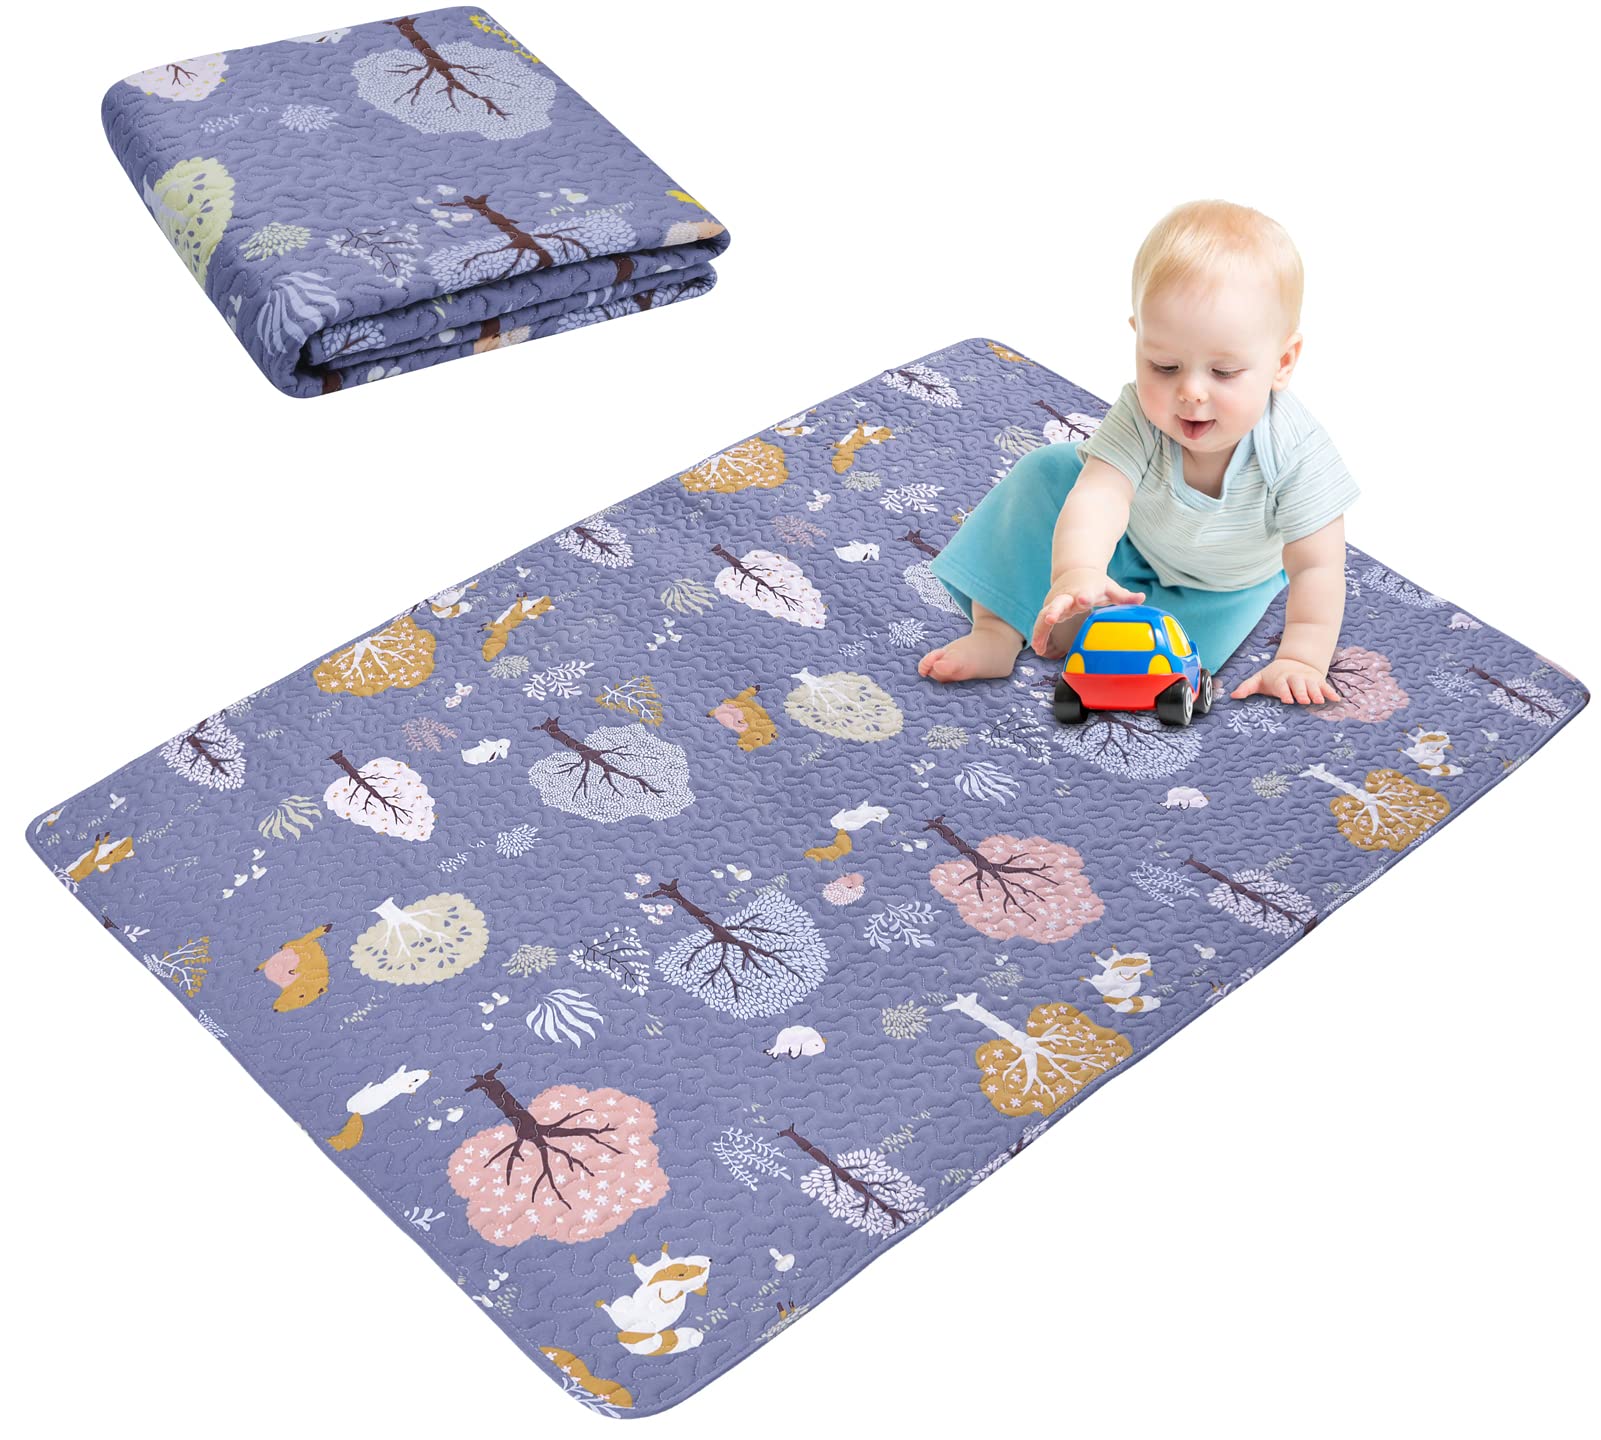 MIIMER Washable Baby Cotton Play Mat Portable Playmat for Babies 160x110 cm, Foldable Toddler Play Mat Non-Slip Baby Tummy Time Mat, Soft Floor Play Mats for Infants Extra Large Crawling Mat